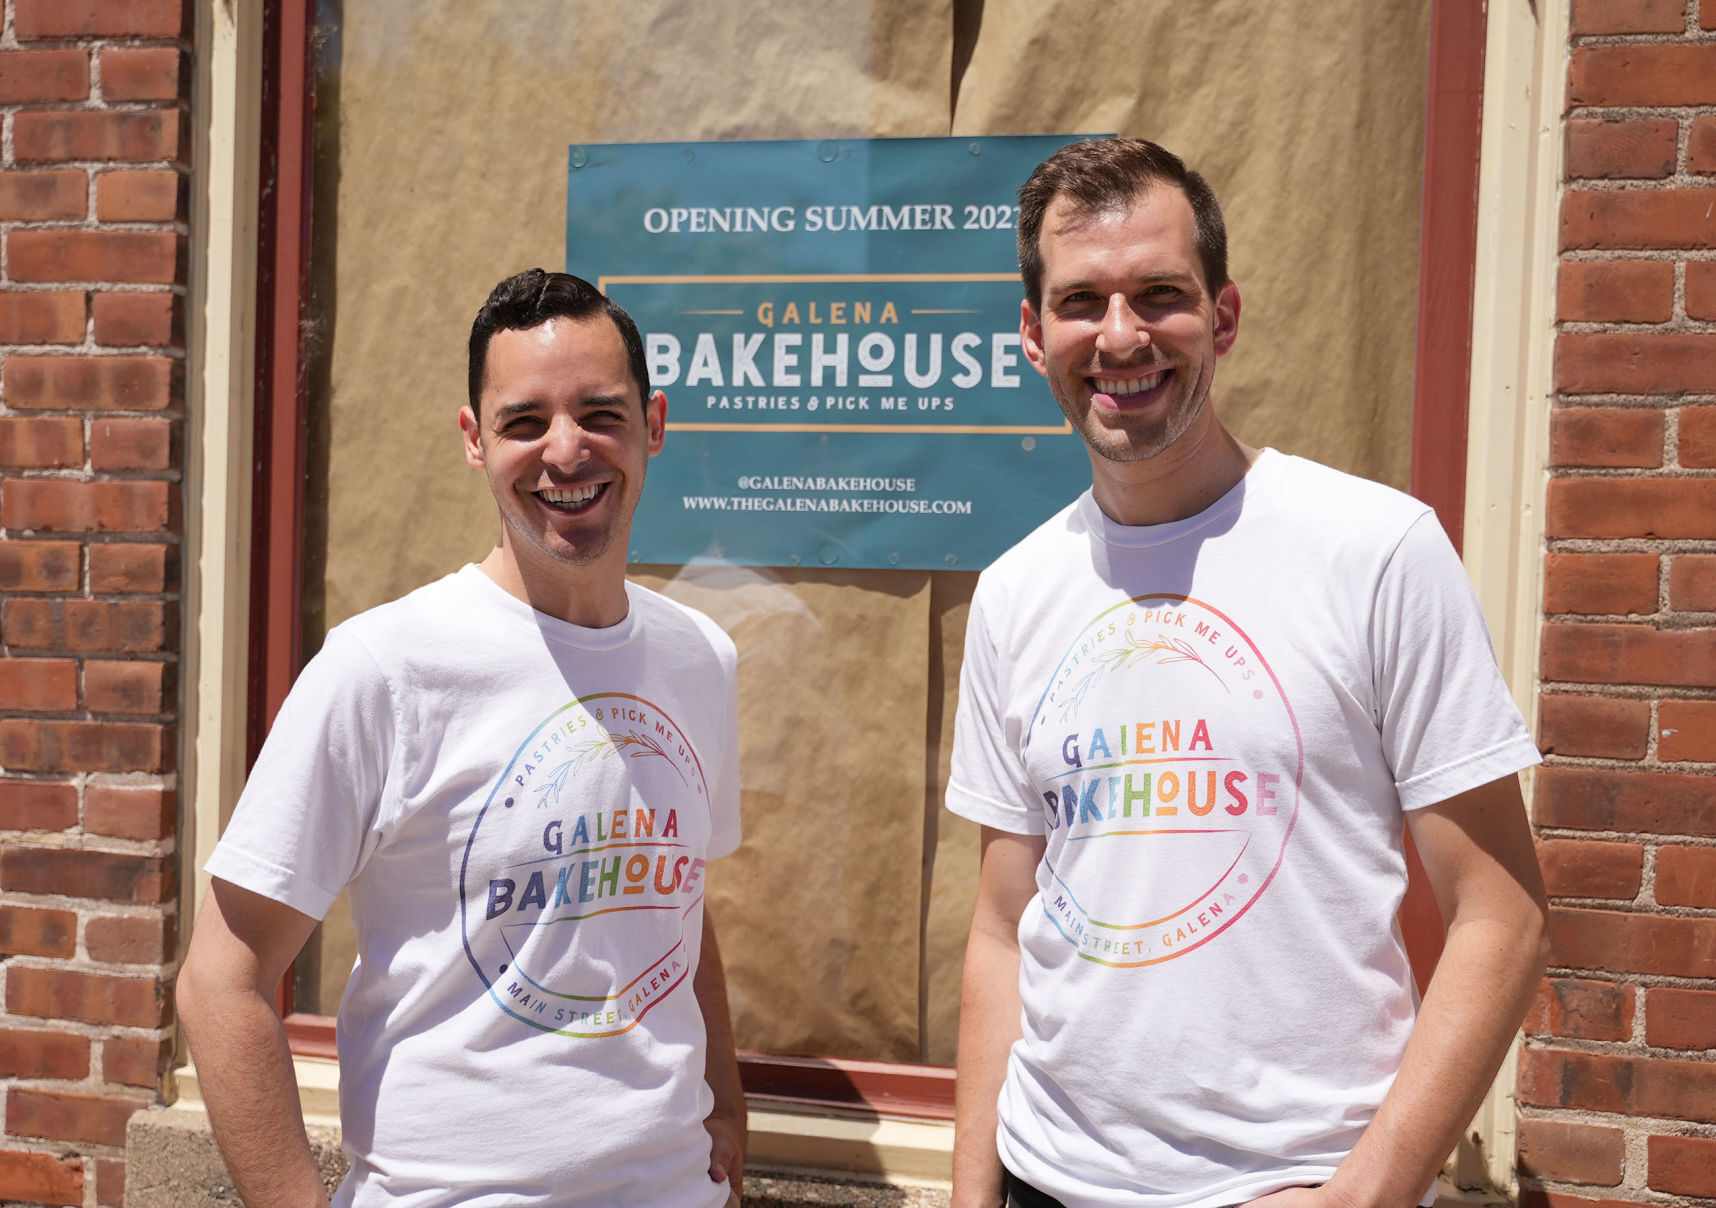 Owners, Alex Arroyo (left) and Geoff Karnish stand infront of the storefront of Galena Bakehouse at 421 S. Main St. in Galena, Ill. They plan to be open for business in early August. Photo taken on Saturday, June 19, 2021.    PHOTO CREDIT: PAUL KURUTSIDES